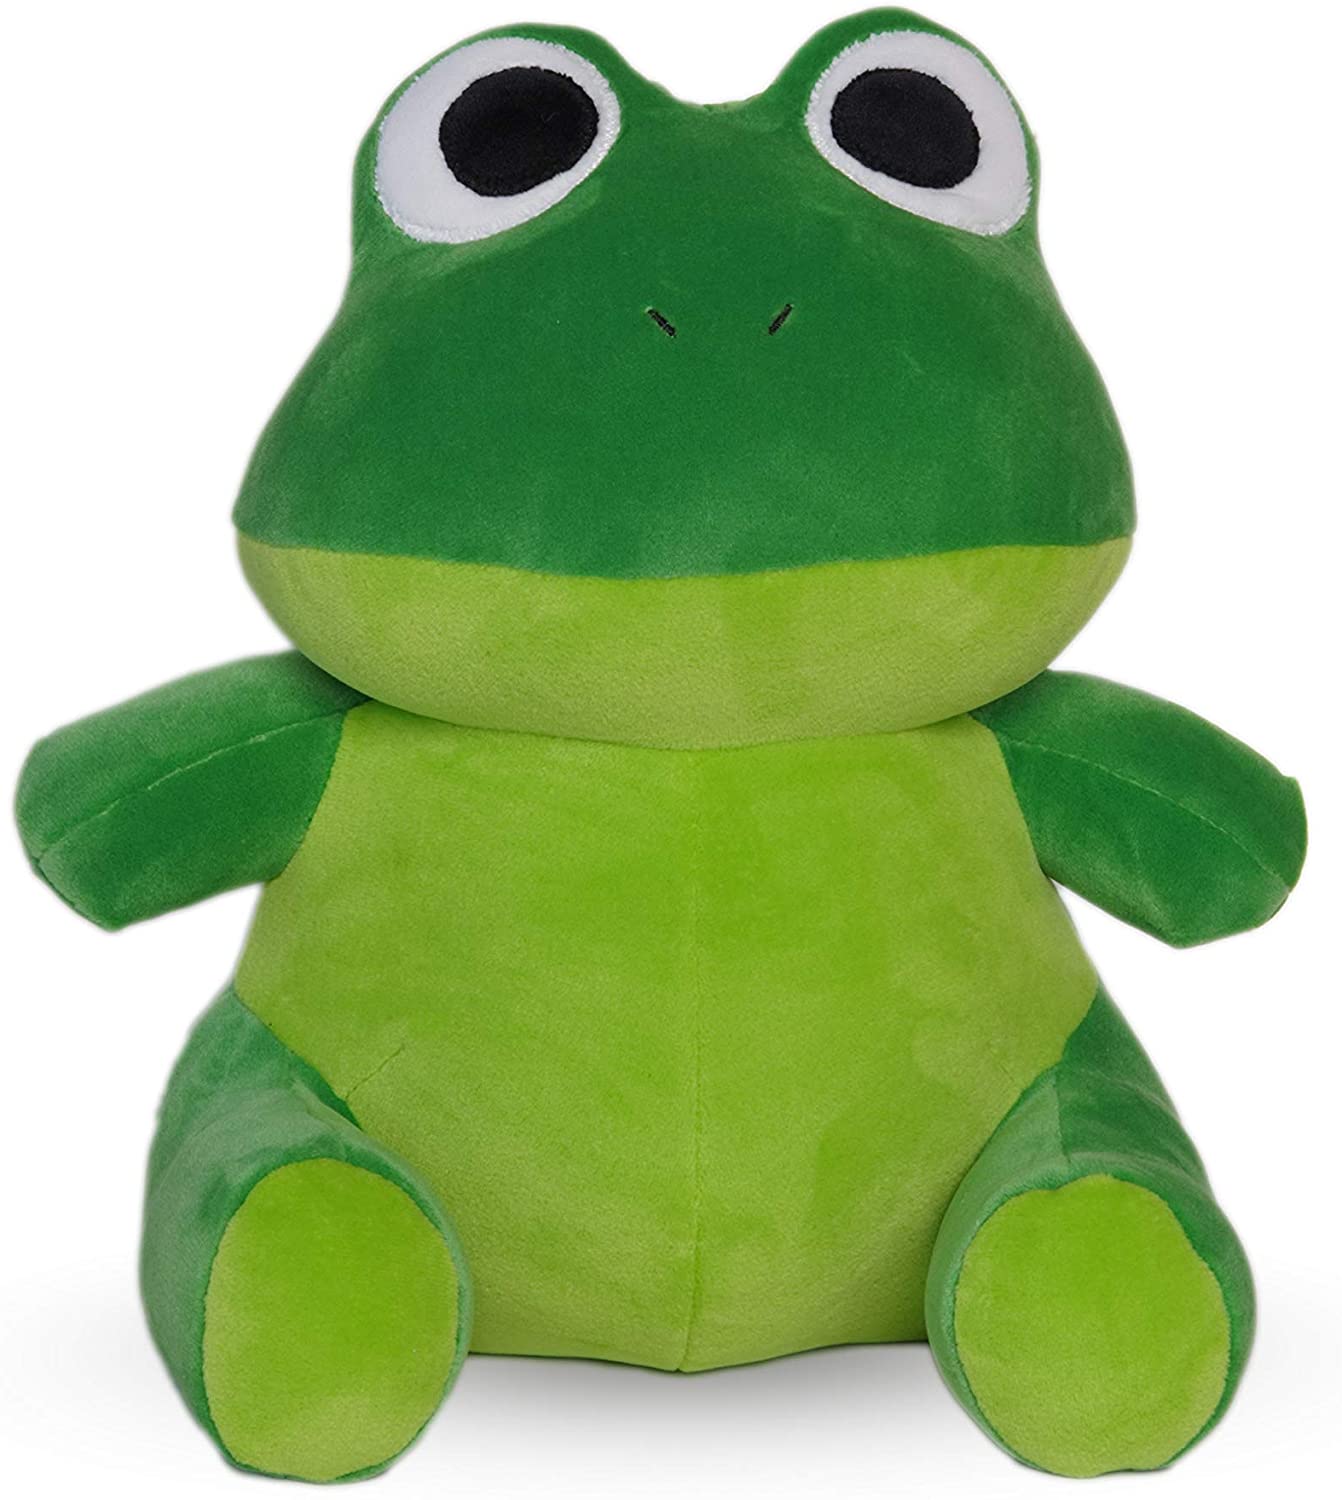 22 Inches Large Plush Giant Frog Stuffed Animal Soft Toy Green 